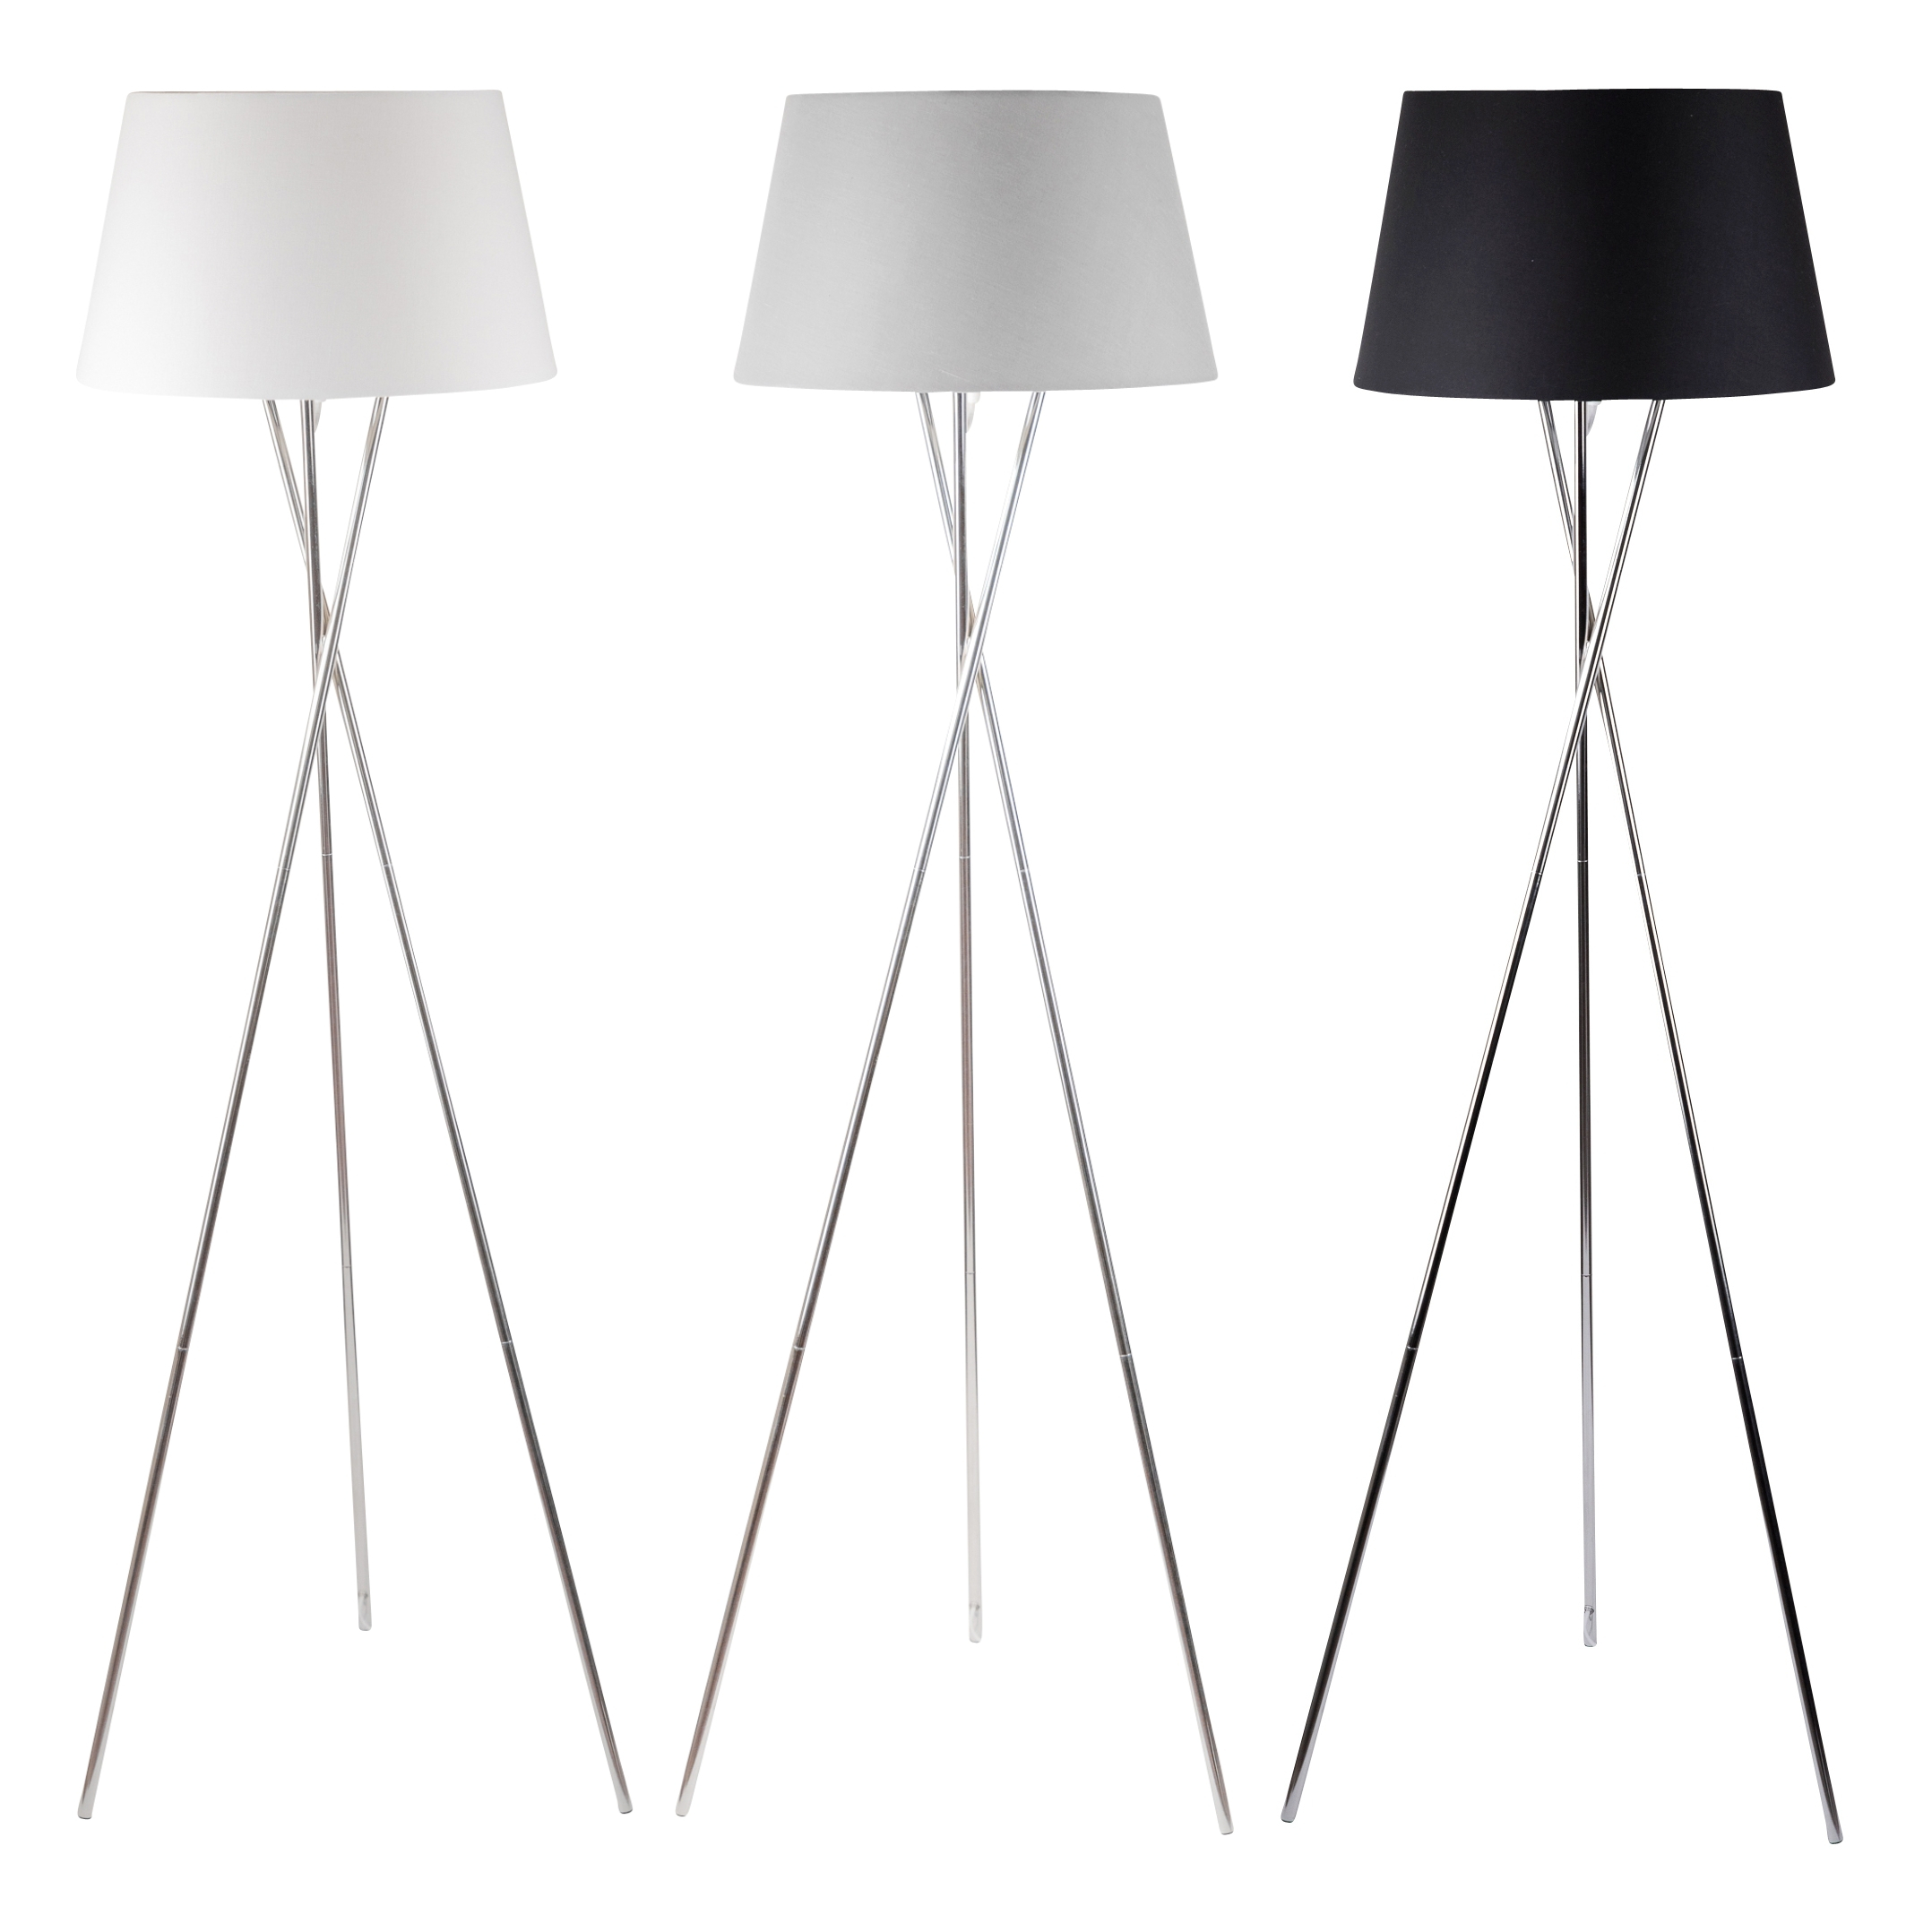 Details About Modern Chrome Twist Tripod Floor Lamp Standard Light Grey White Or Black Shade with regard to size 2156 X 2156